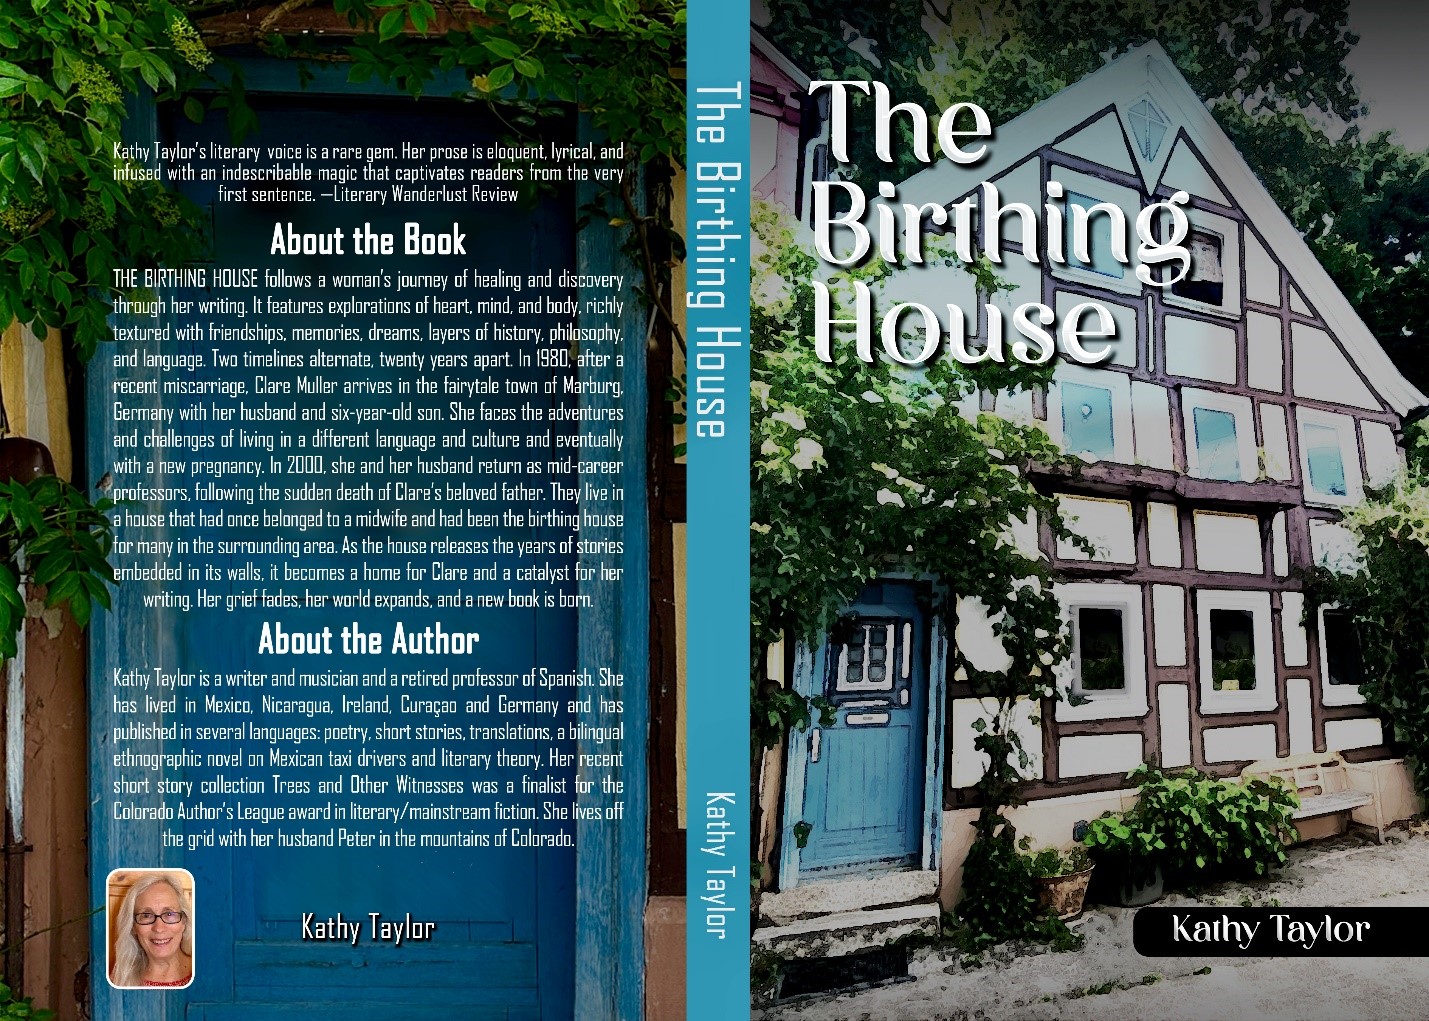 "The Birthing House" by Kathy Taylor: A Captivating Tale of Healing and Transformation